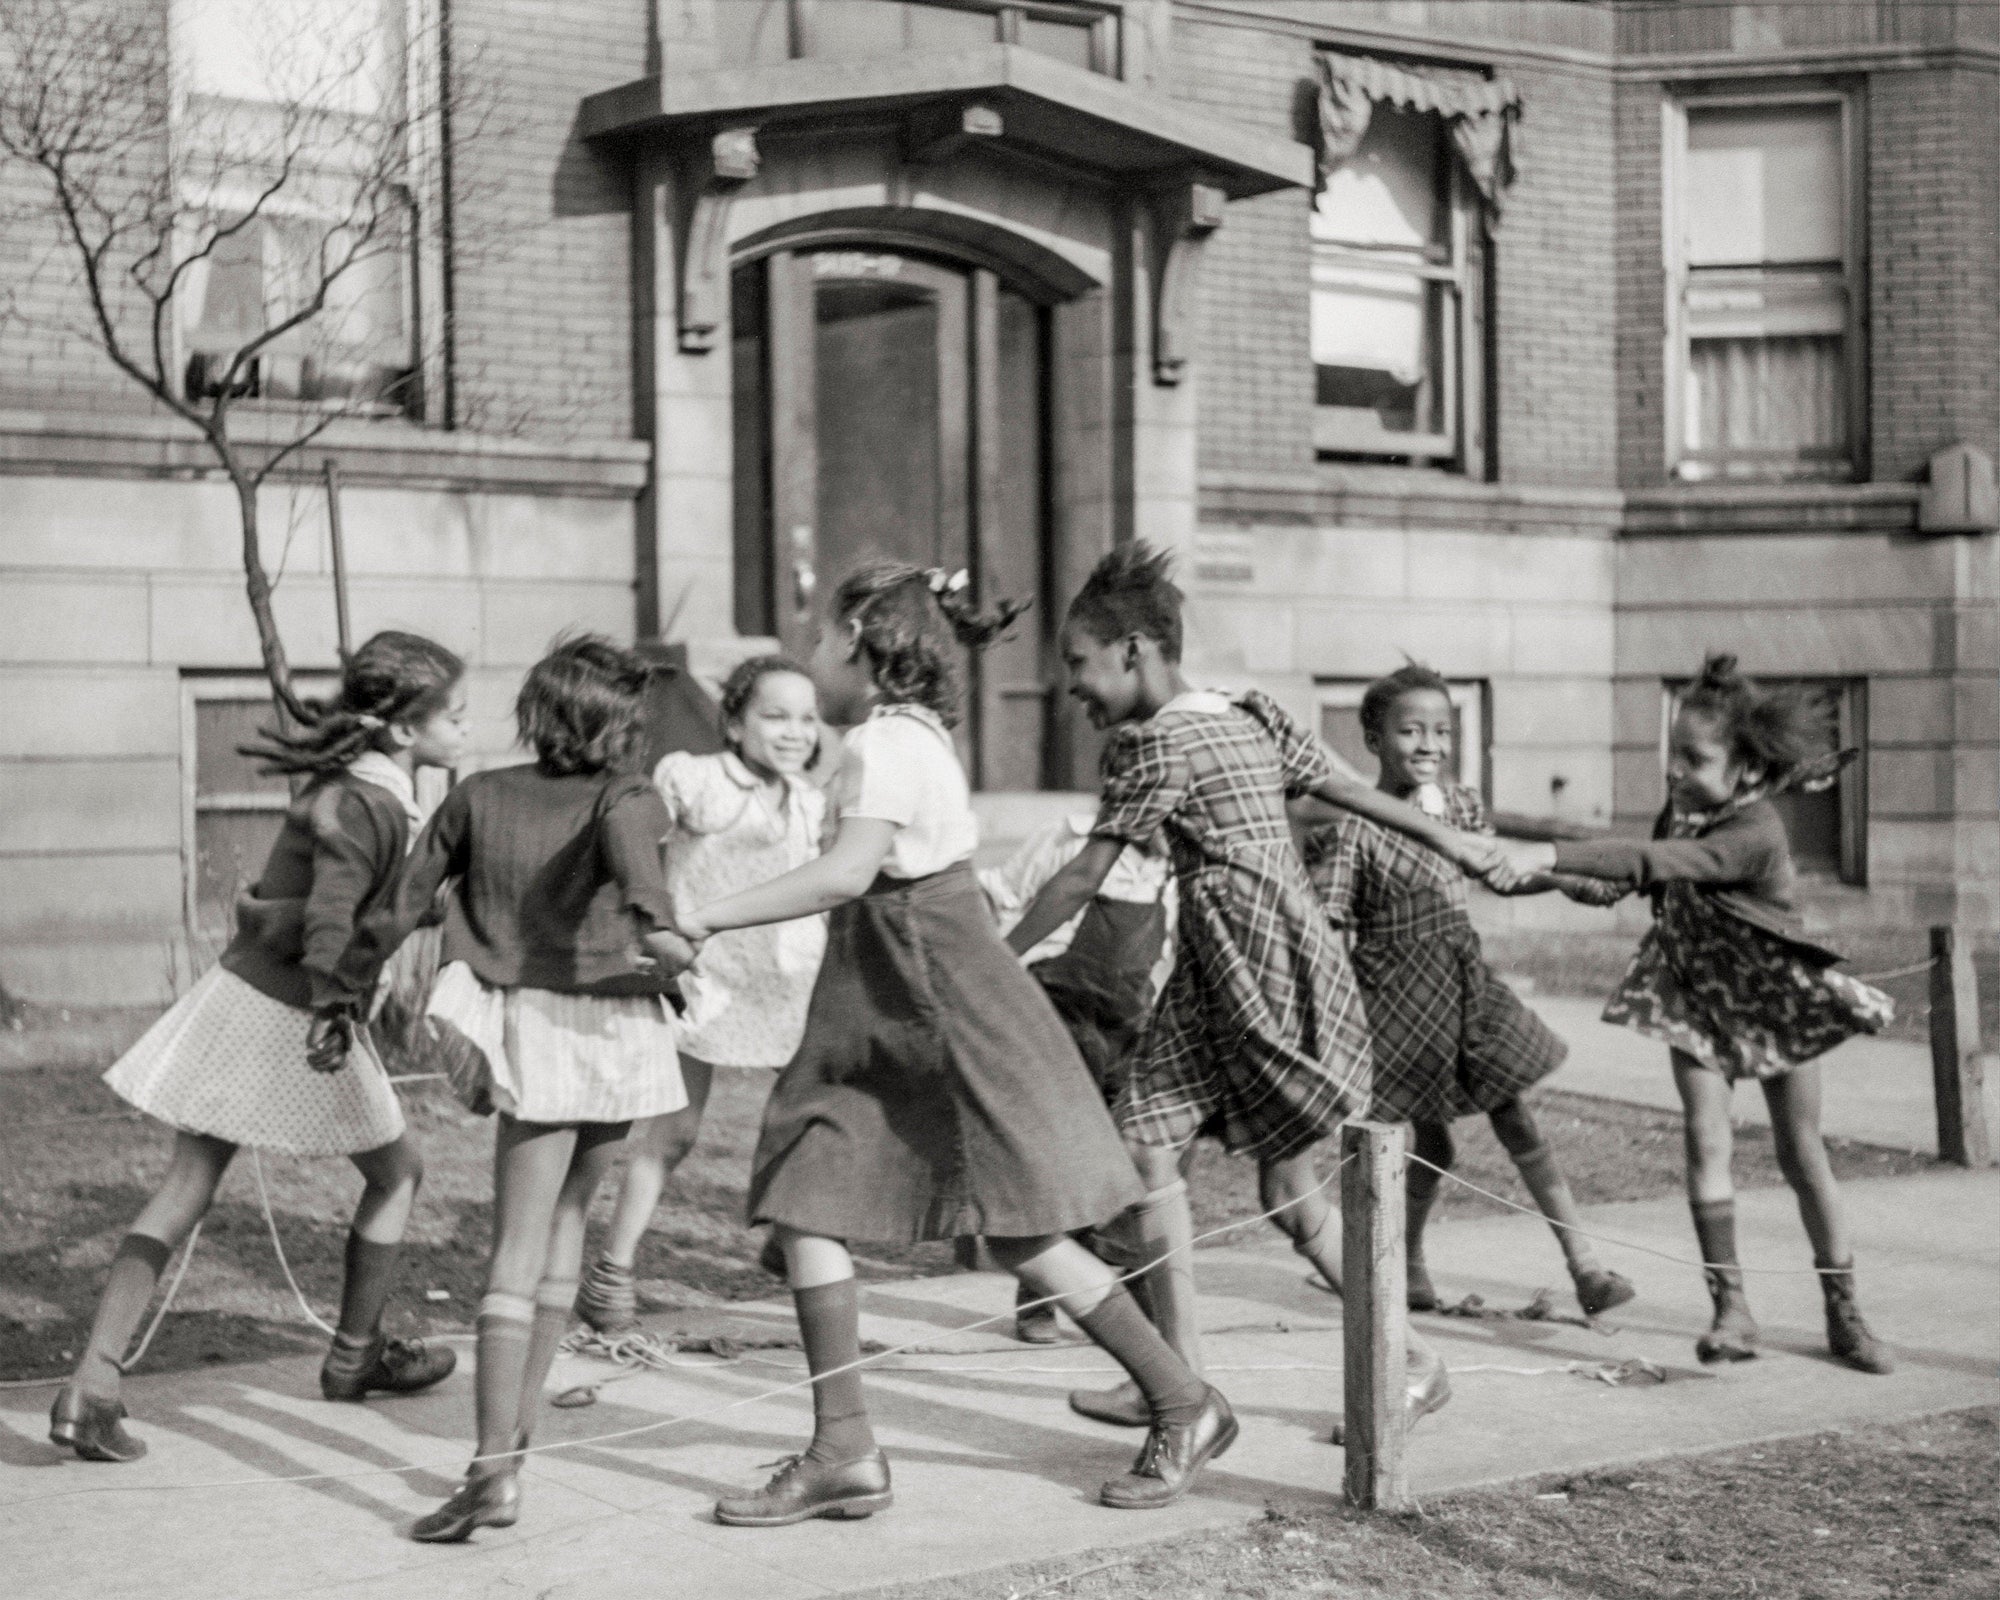 African American Girls Playing, Chicago, Illinois, 1941, Edwin Rosskam Historical Pix